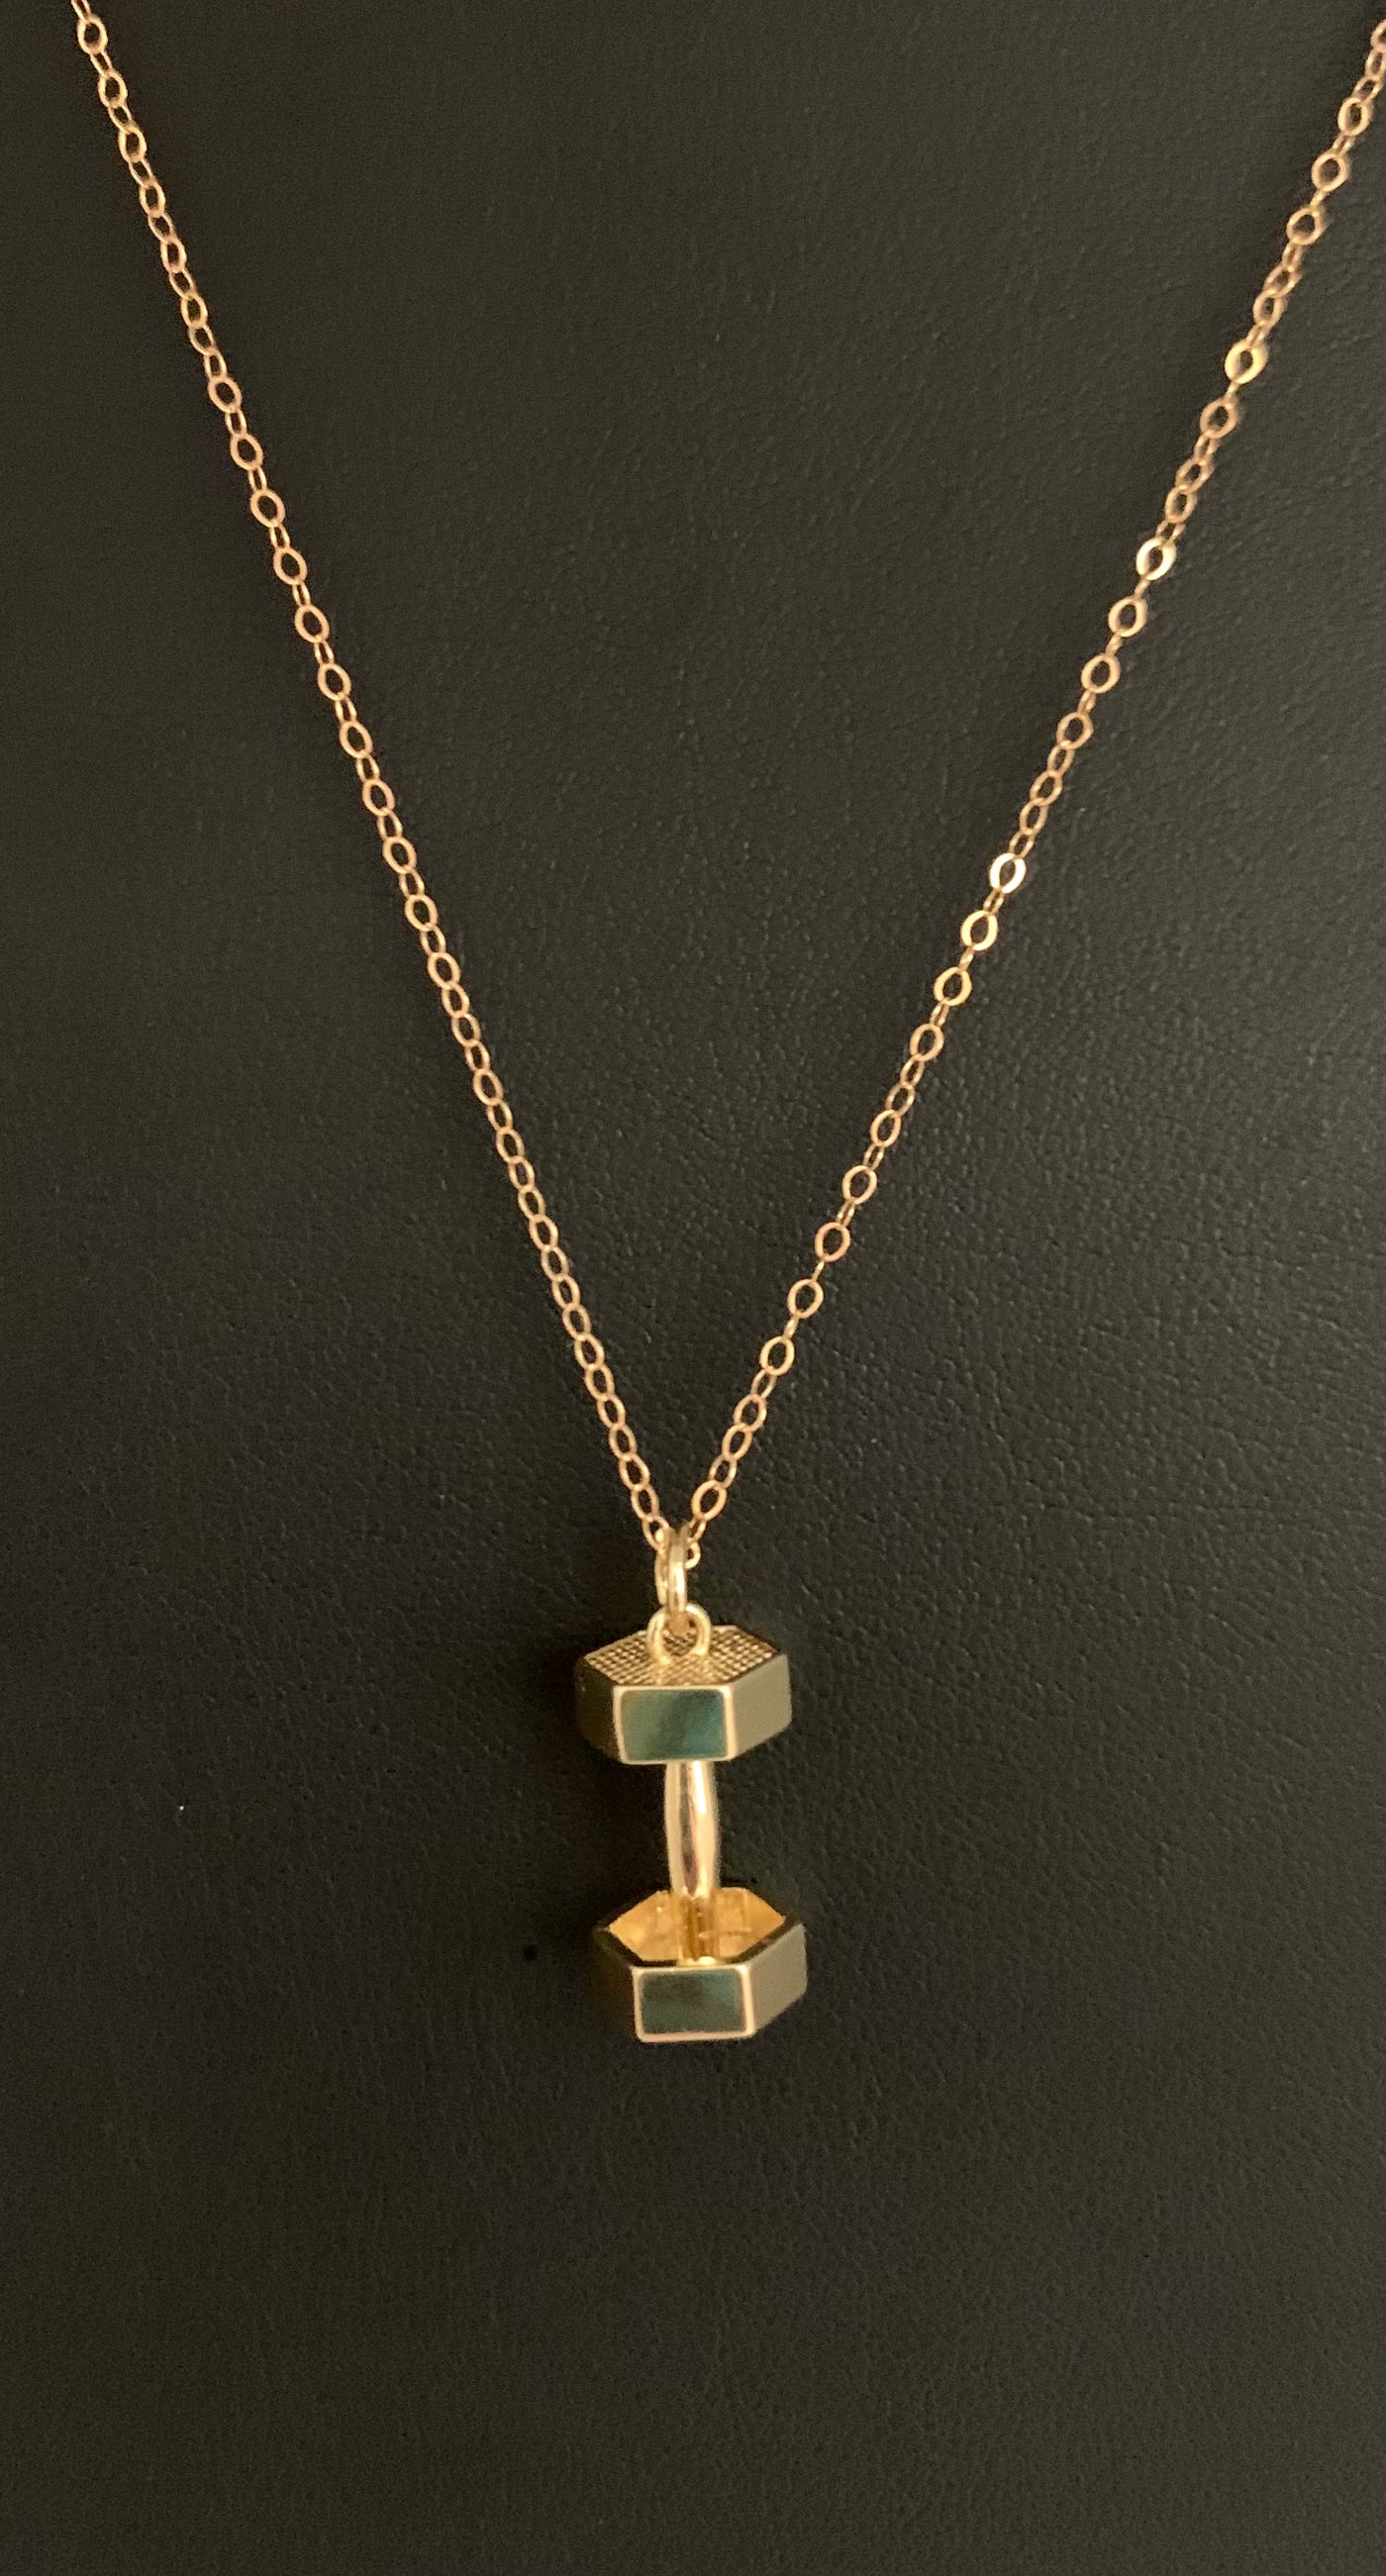 Gold Women’s Pendant Necklace with Gold Dumbbell - Brent's Bling